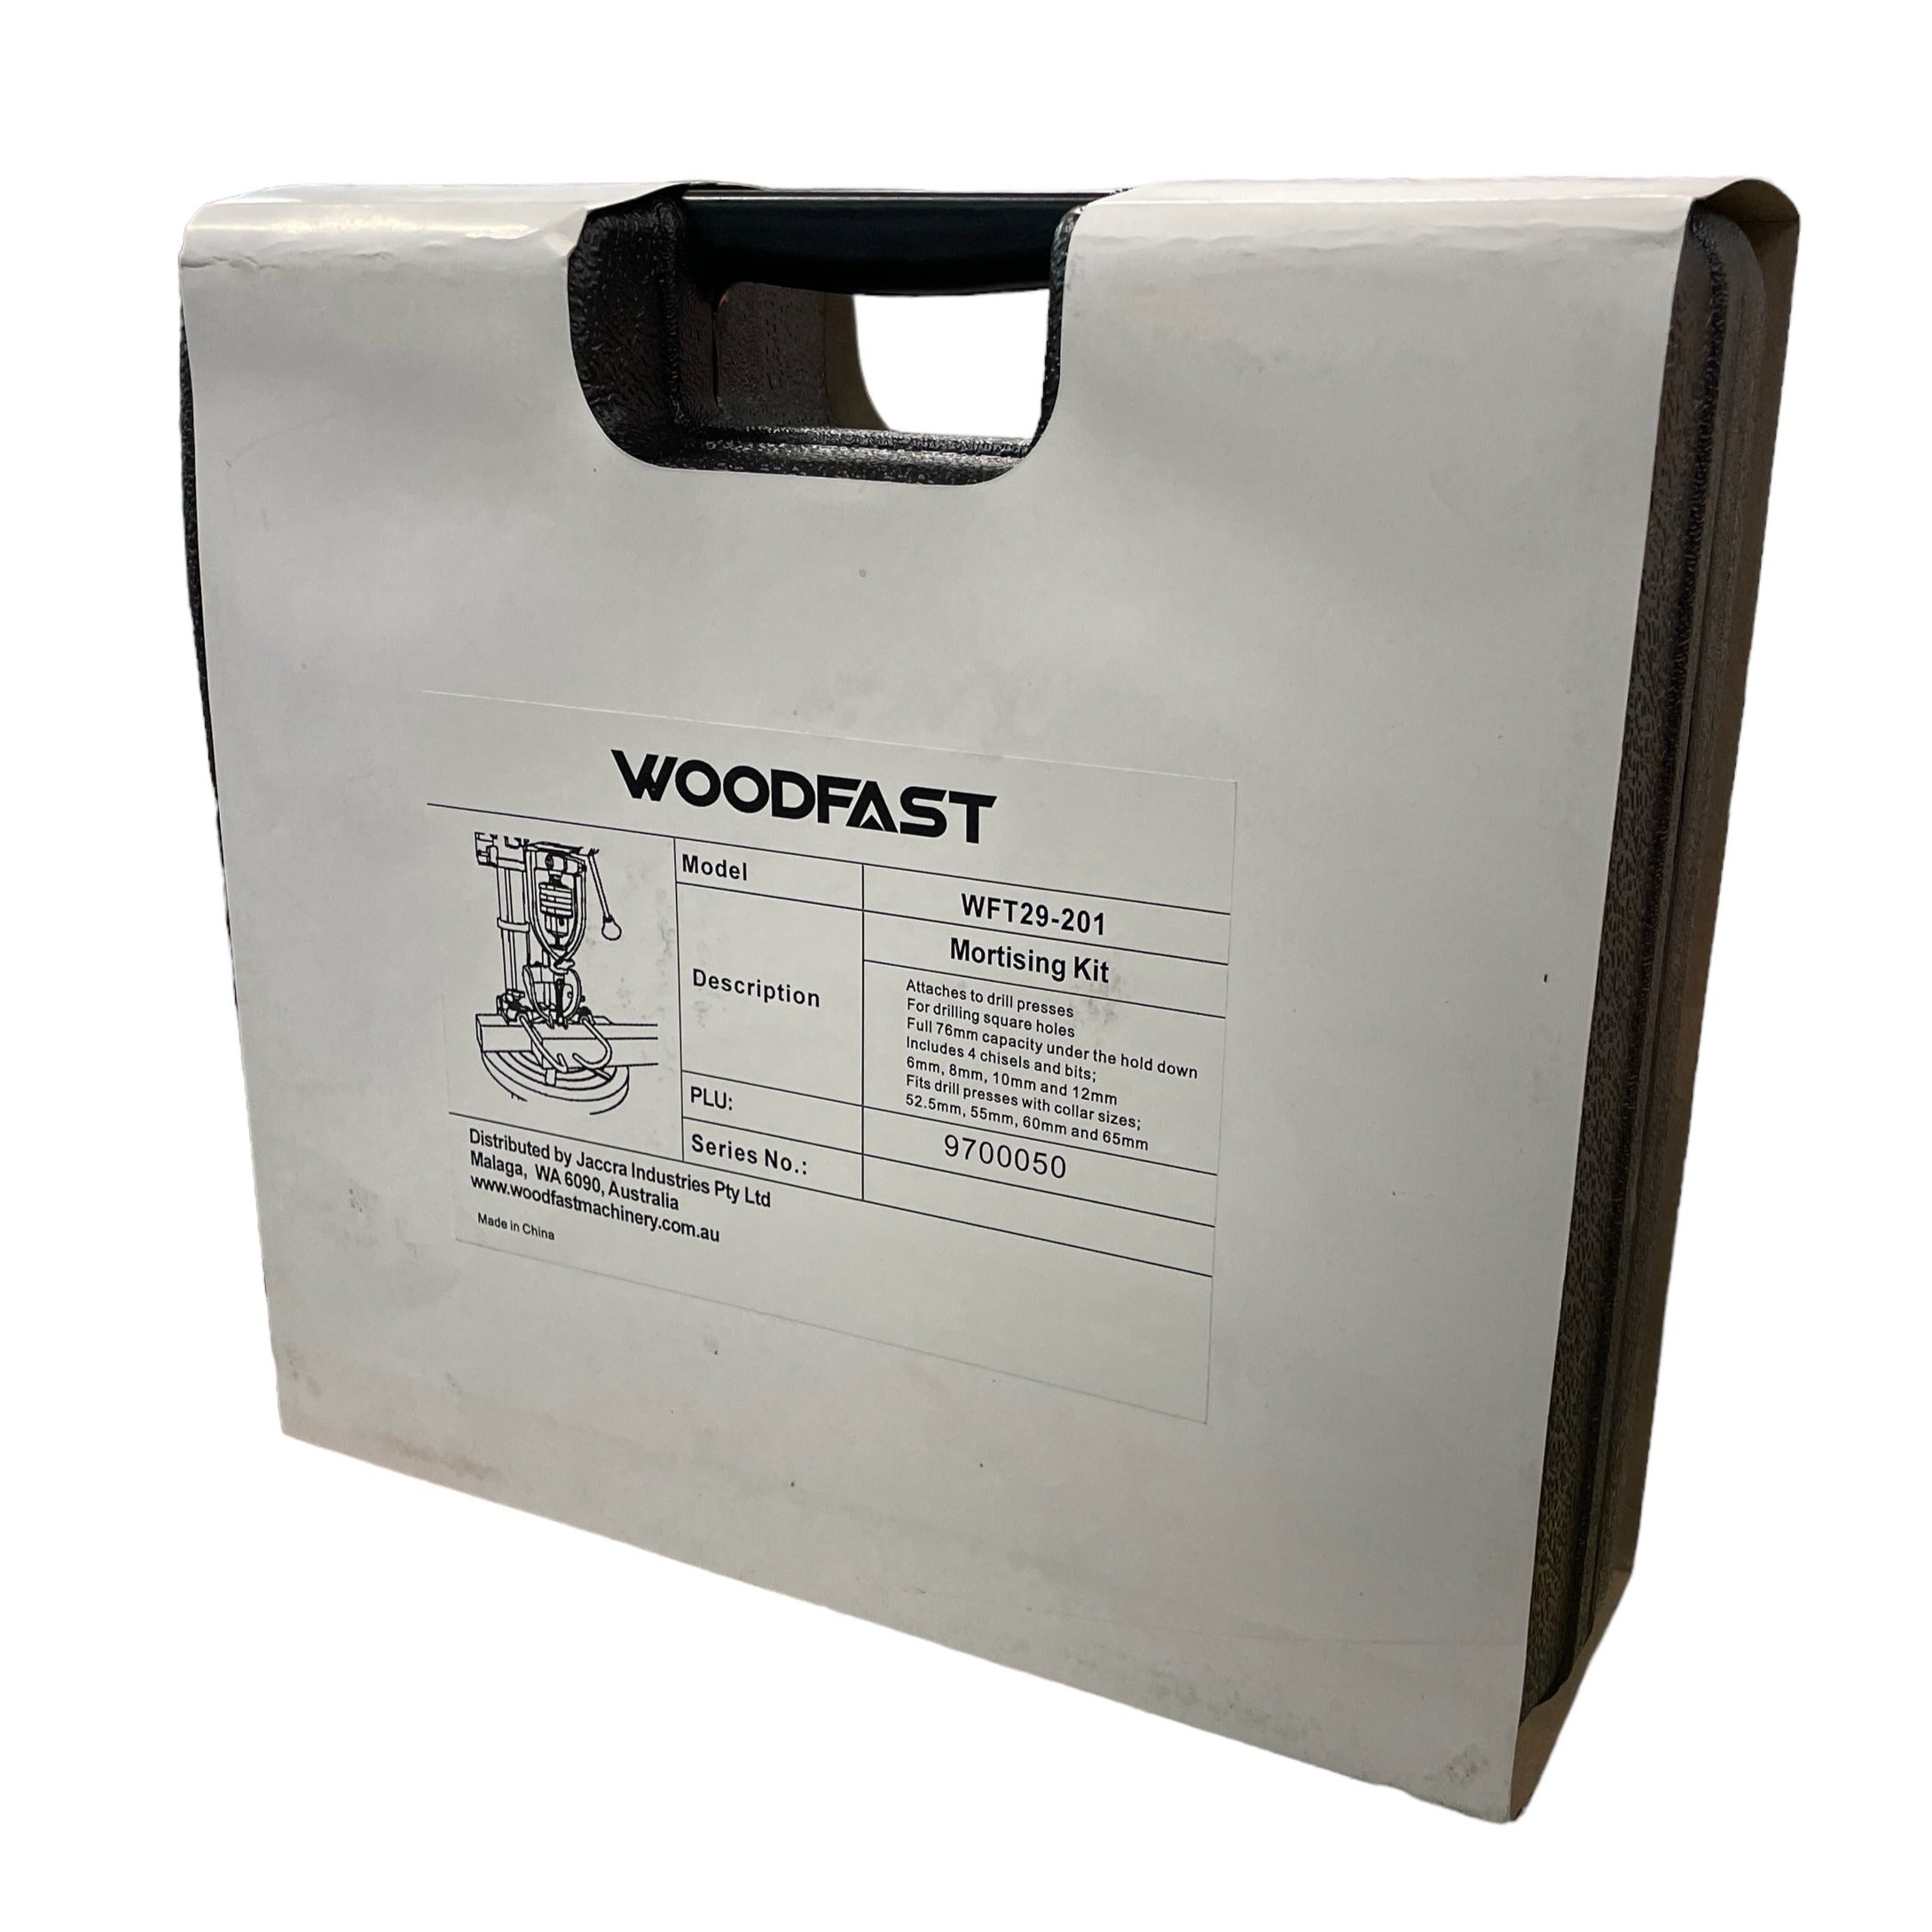 Mortising Kit WFT29-201 by Woodfast